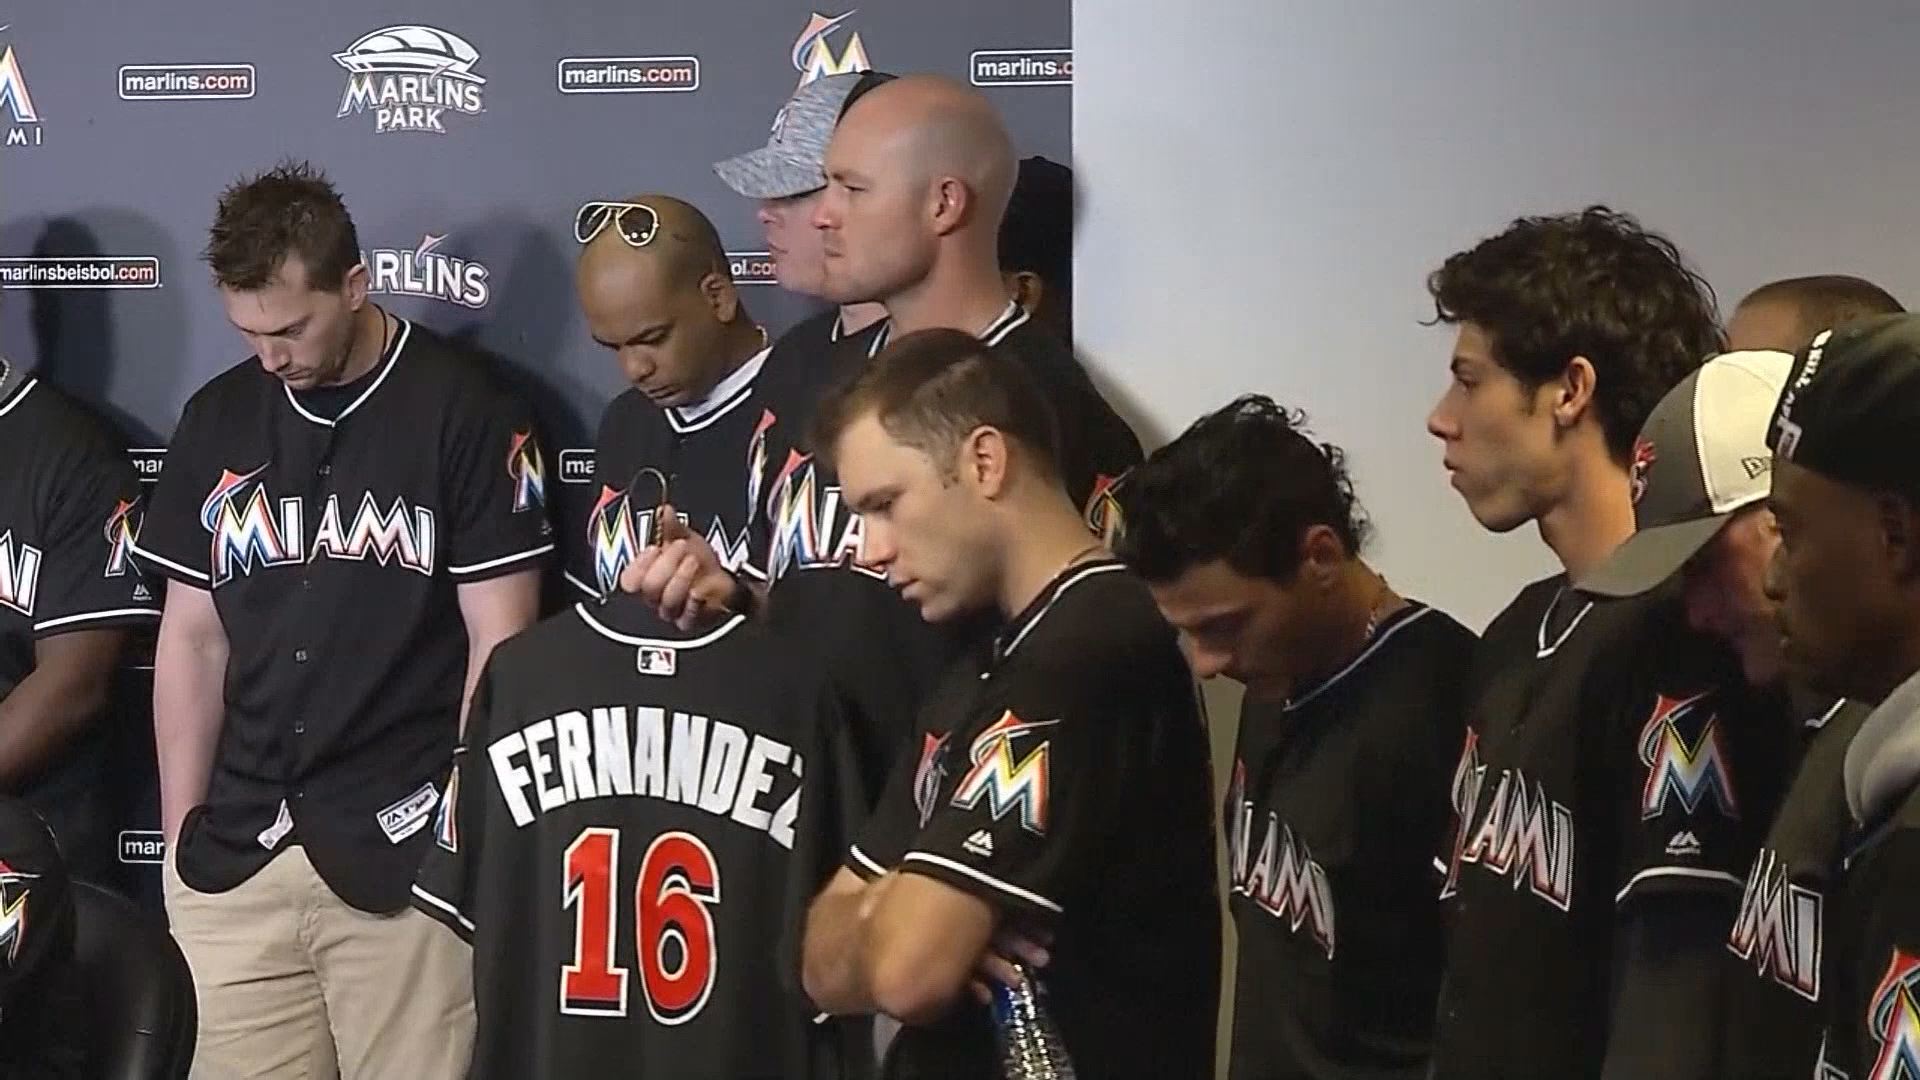 Marlins players gather at park to grieve death of Jose Fernandez